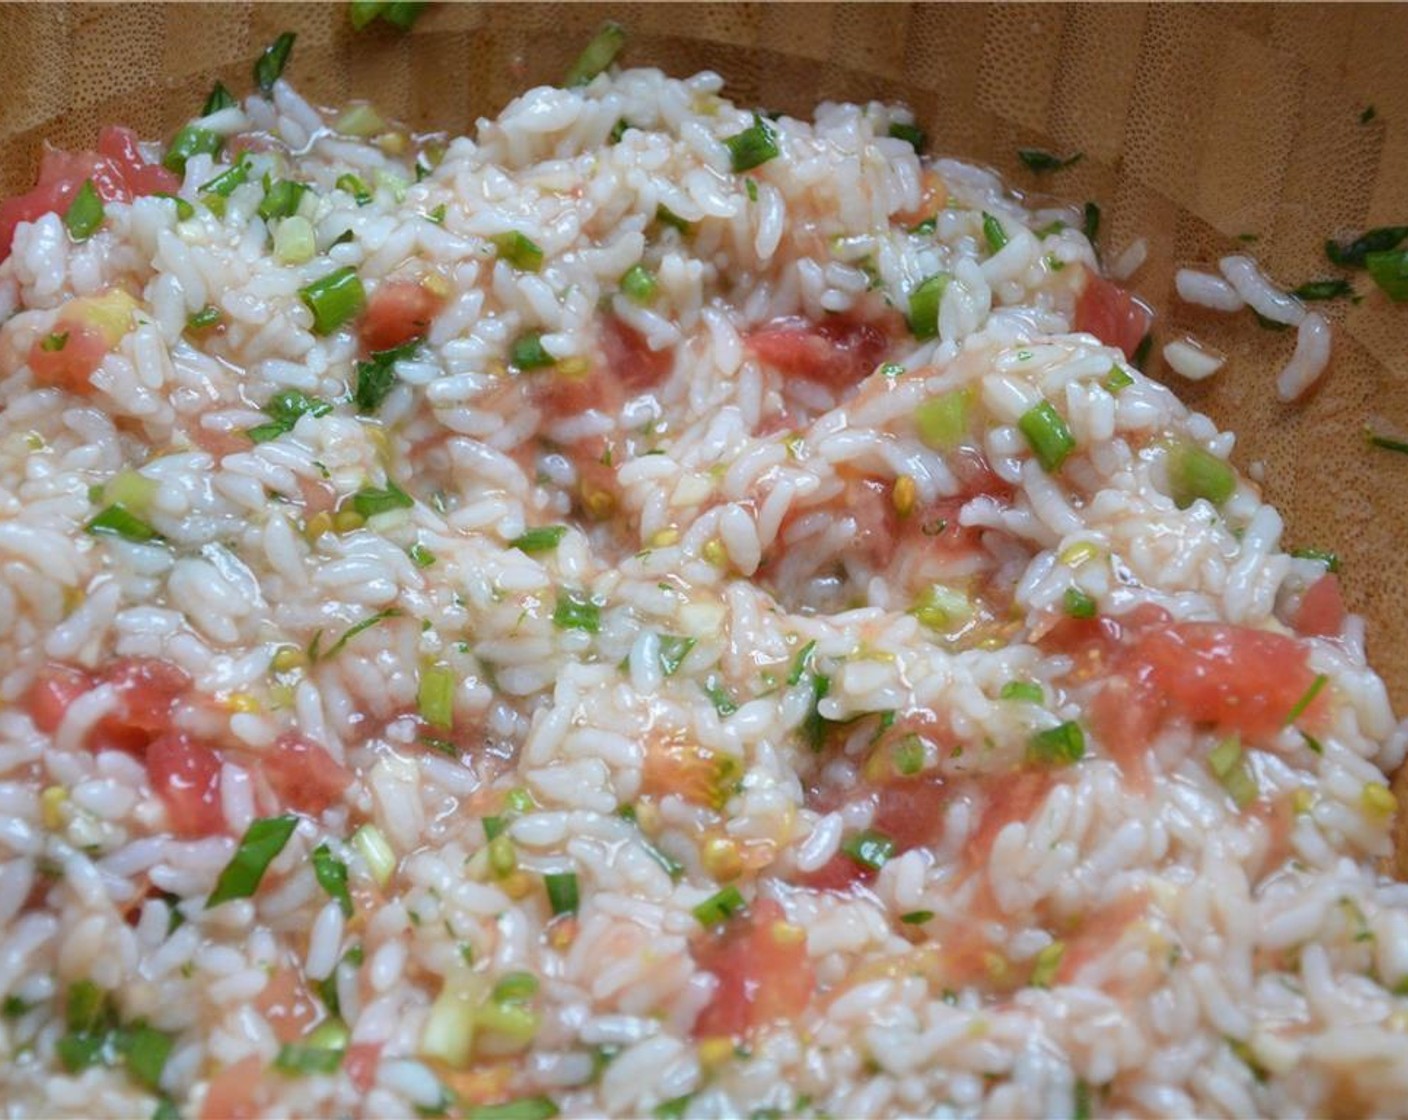 step 5 When the rice is cooked, mix it with the basil/tomatoes mixture.